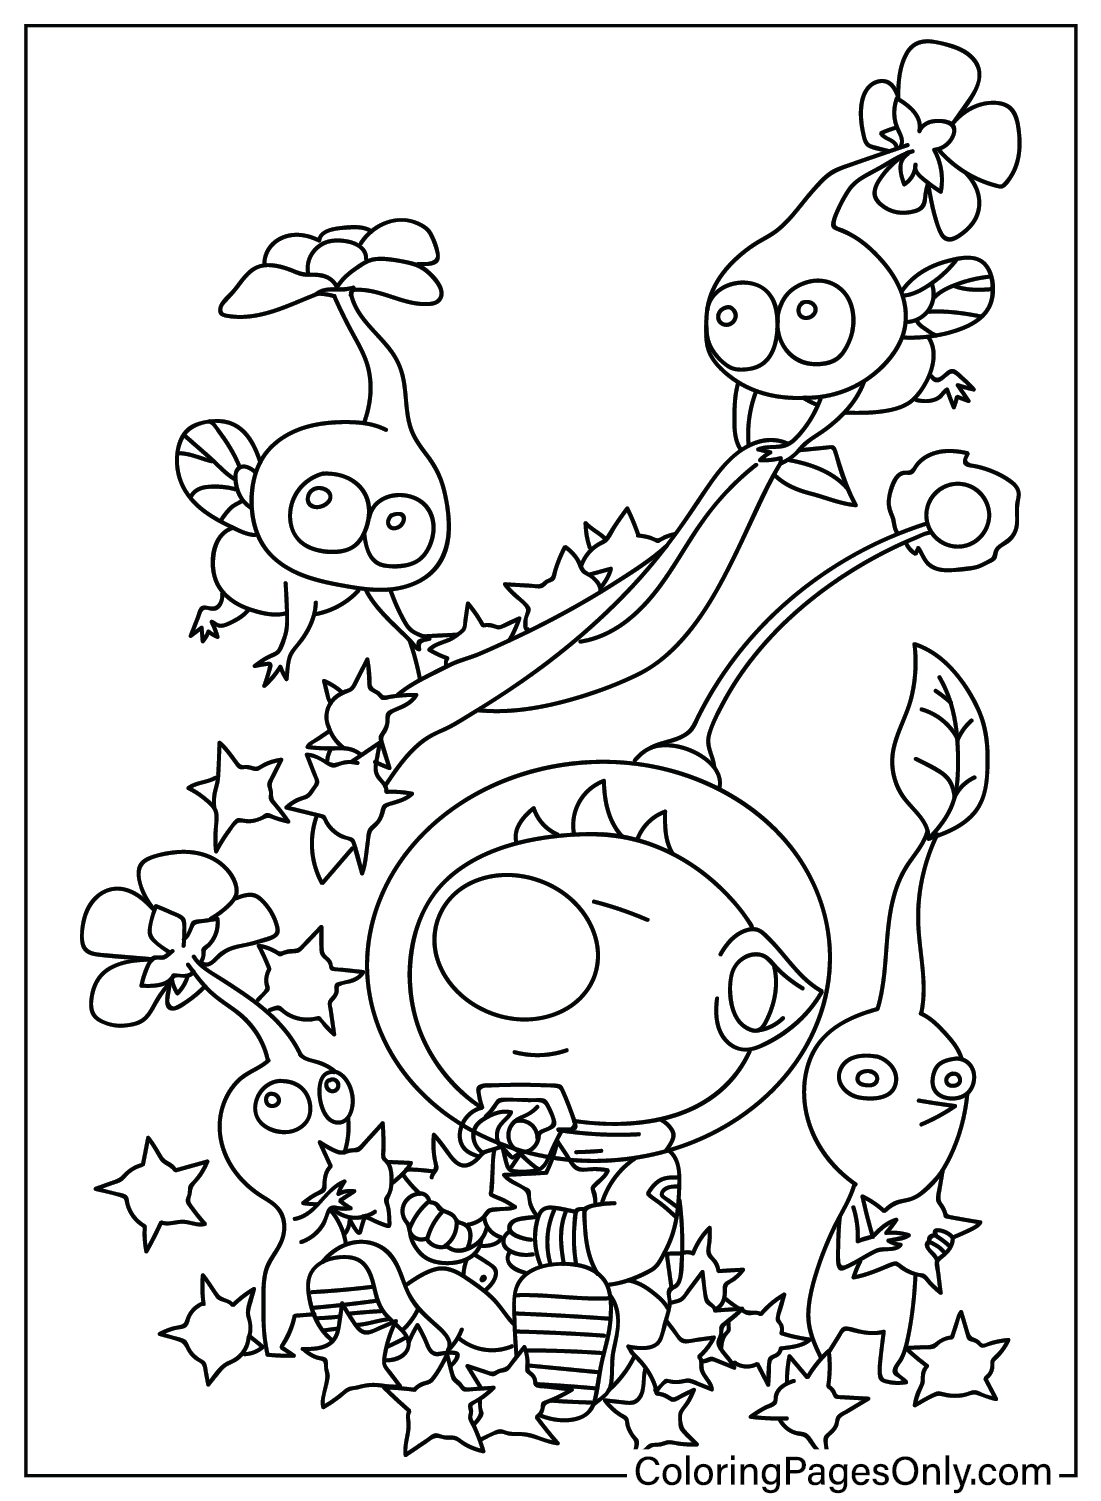 Pikmin Coloring Page from Pikmin